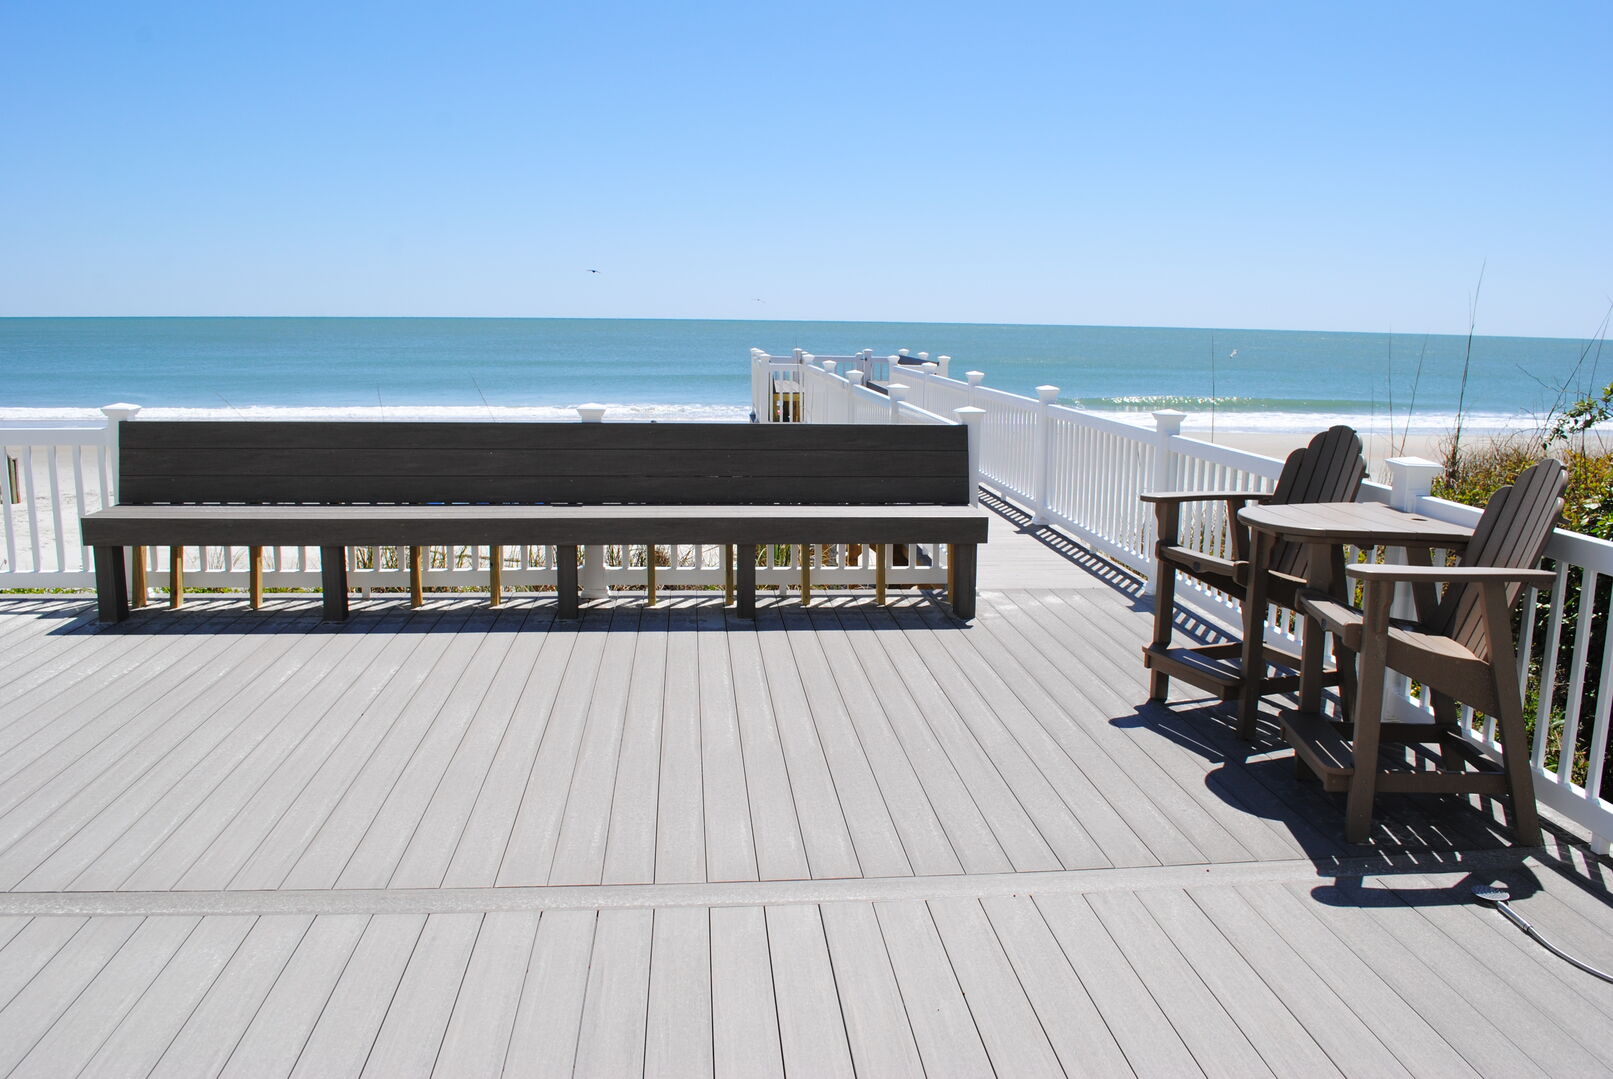 Pool Deck and Private Walkway to the Beach